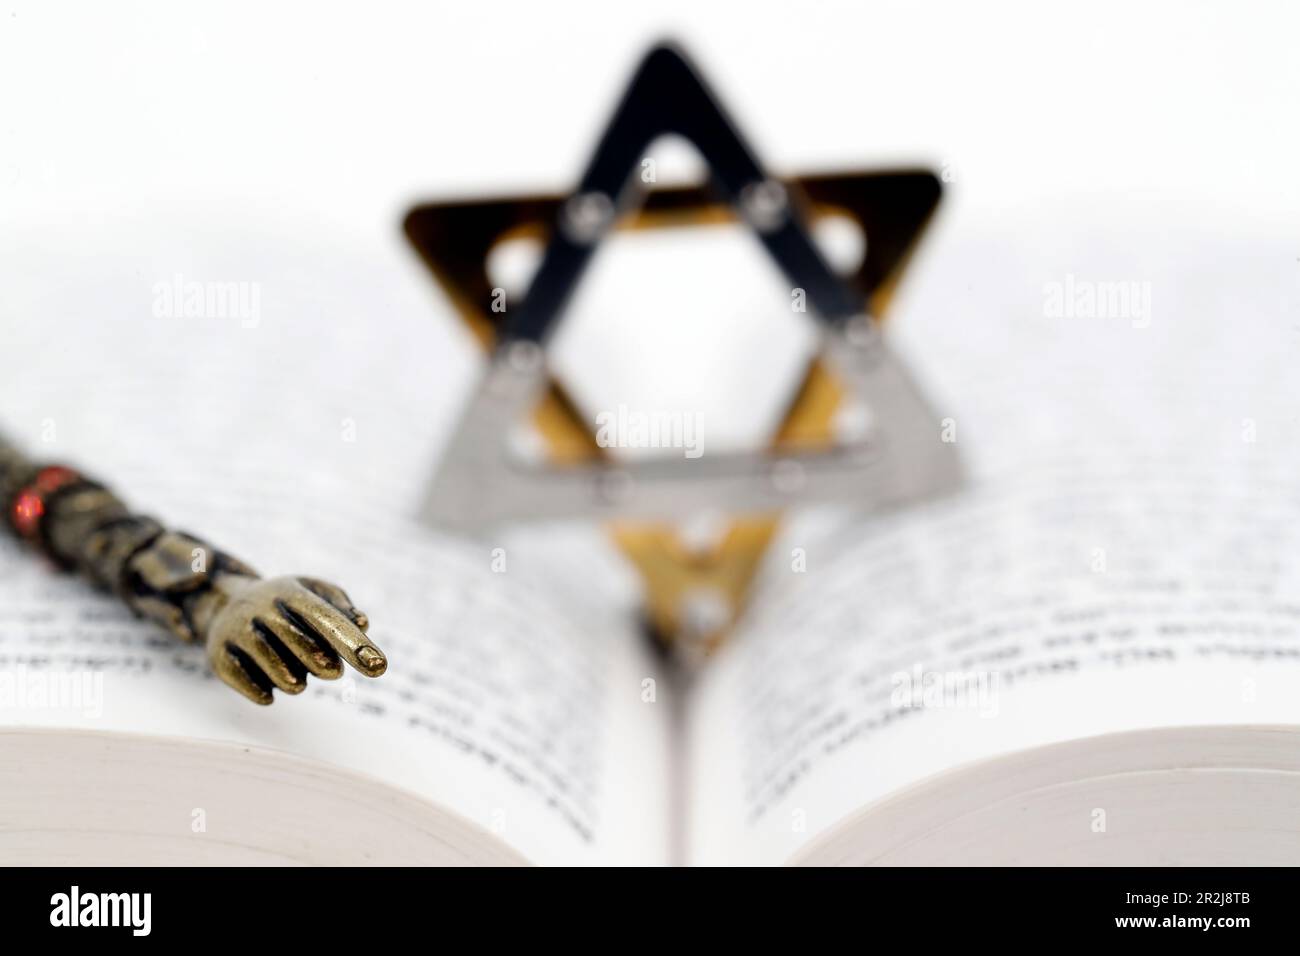 Close-up detail of a Torah in Hebrew, Star of David and a yad, Jewish symbols, France, Europe Stock Photo